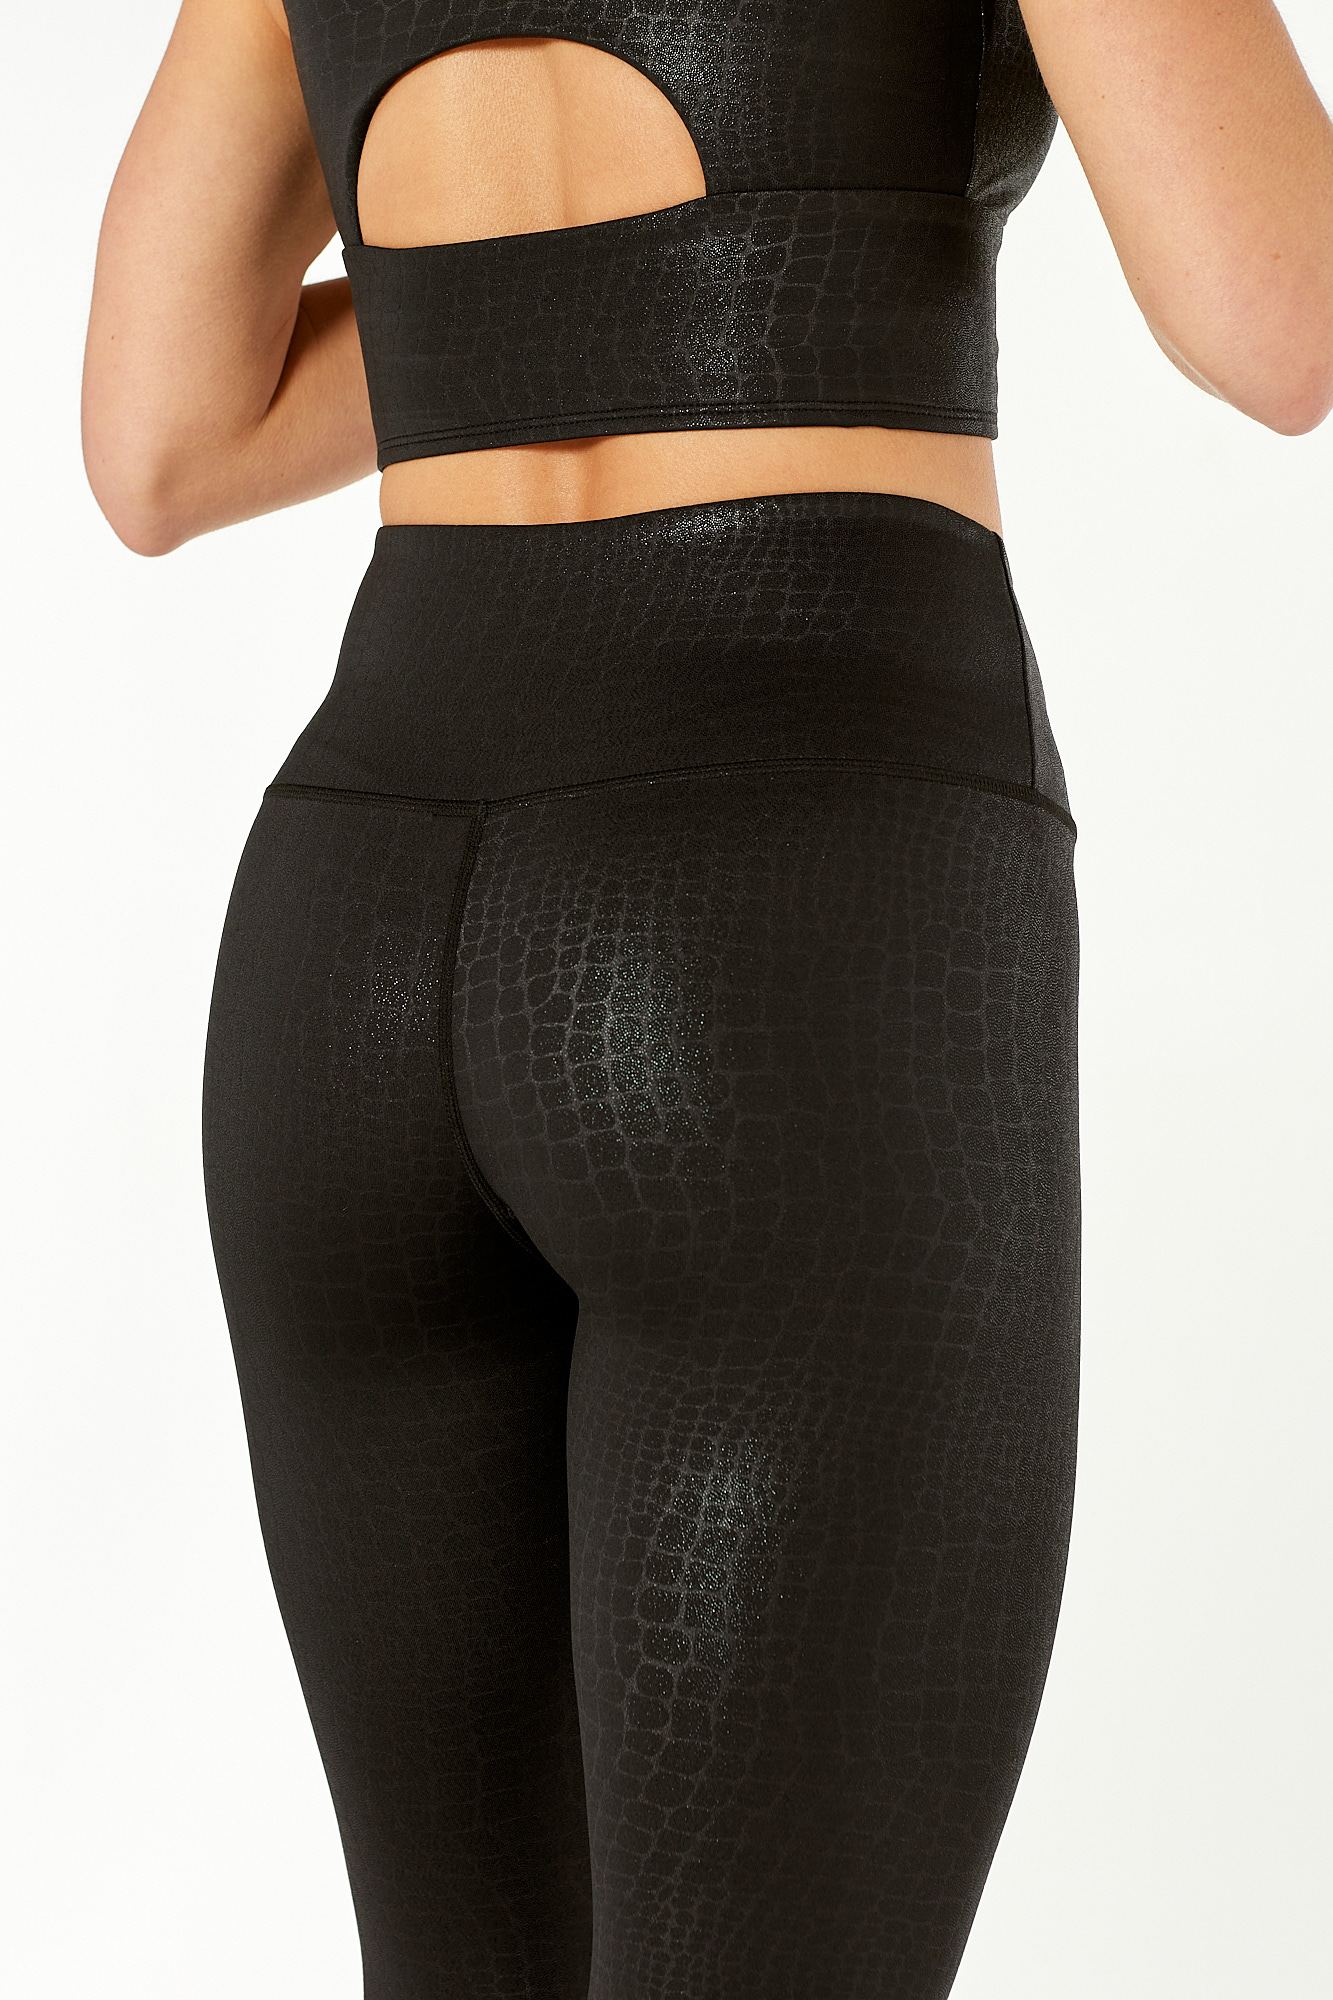 Bum Sculpting Leggings Made from Recycled Plastic Bottles by Born Nouli